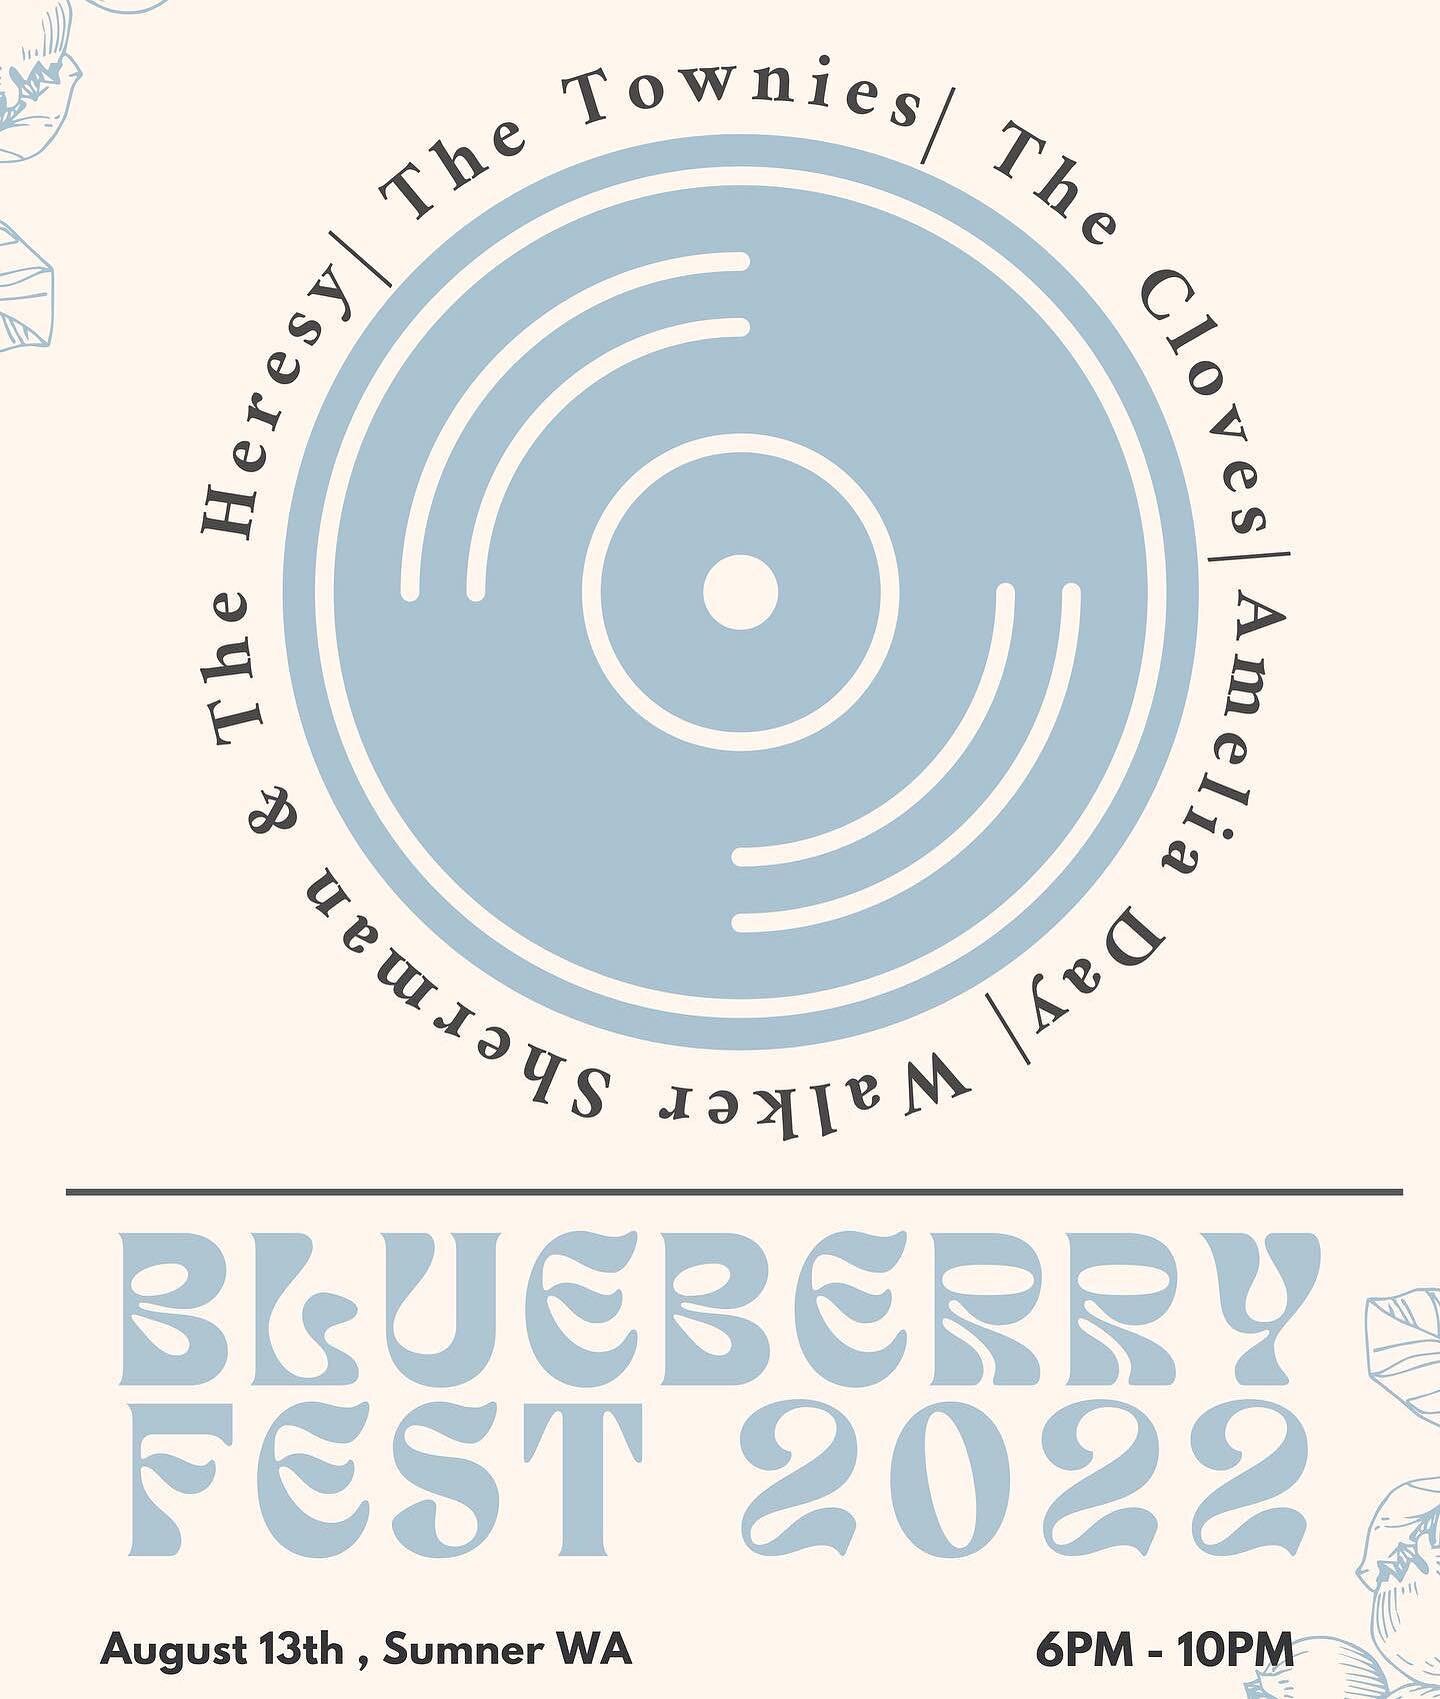 Vinyl Coffee Roasters presents: BLUEBERRY FEST 2022 w/ special guests:

6:00 Amelia Day 
6:30 Walker Sherman &amp; The Heresy 
7:30 The Townies 
9:00 The Cloves 

Vinyl Coffee will be sharing some freshly roasted beans with some fun giveaways and ser